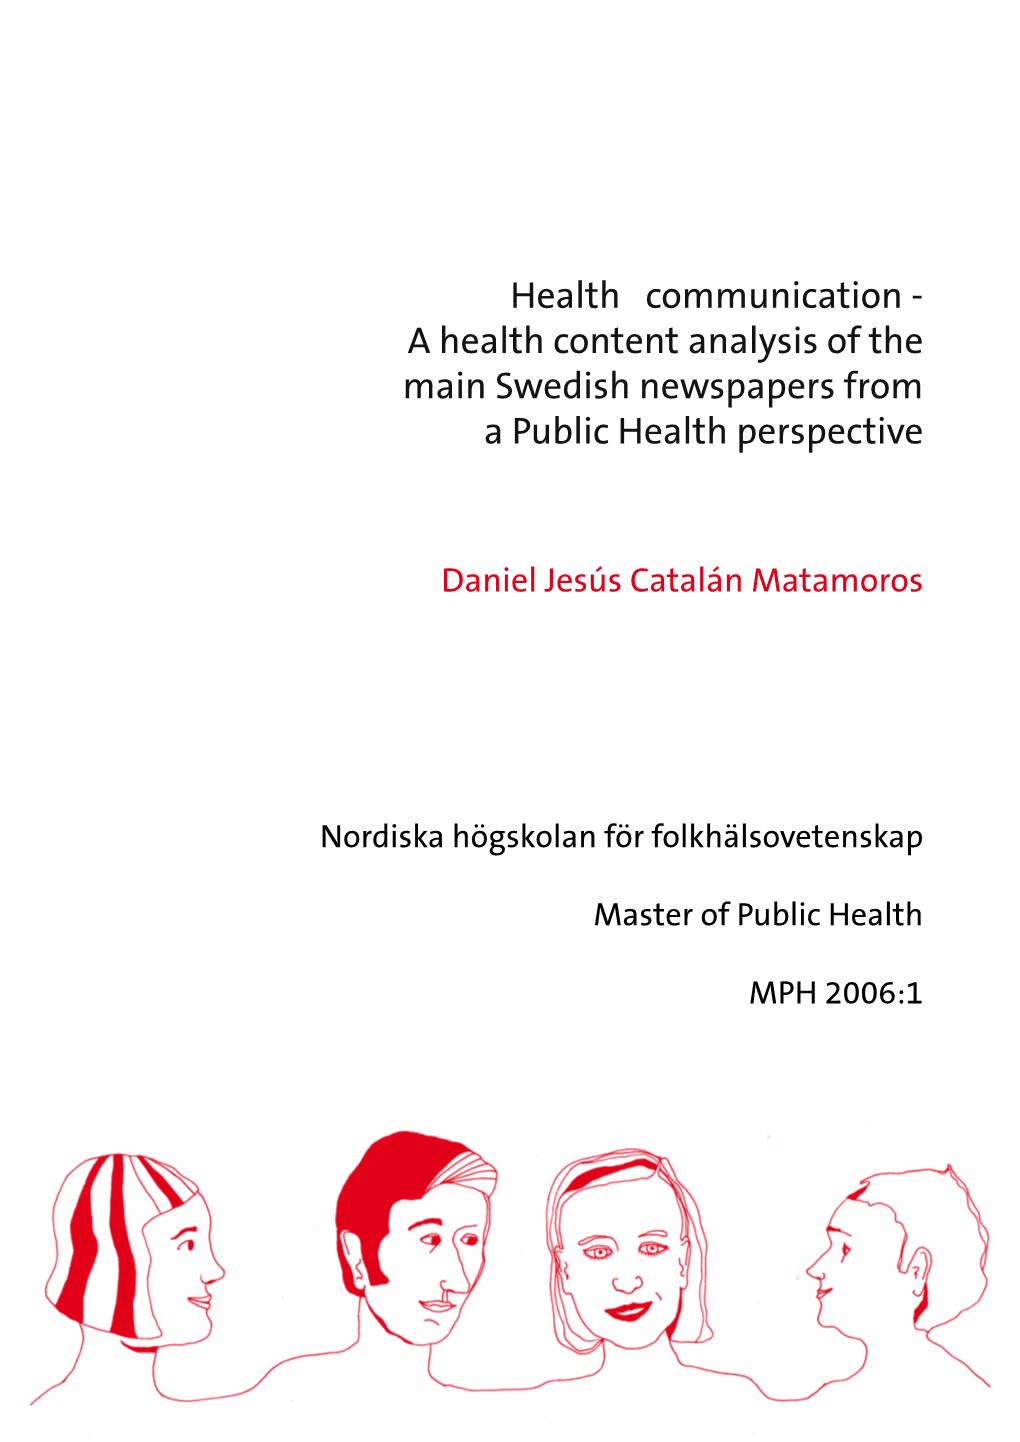 A Health Content Analysis of the Main Swedish Newspapers from a Public Health Perspective